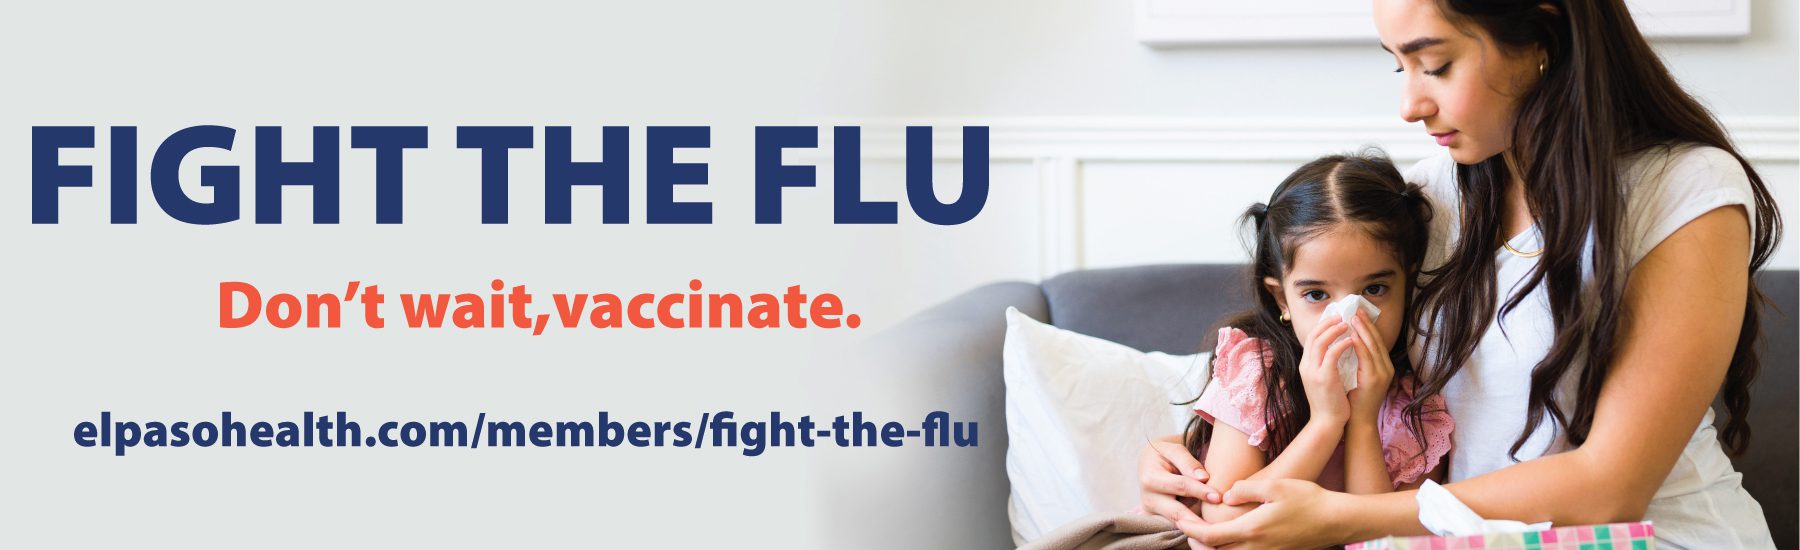 Fight the flu. don't wait vaccinate.